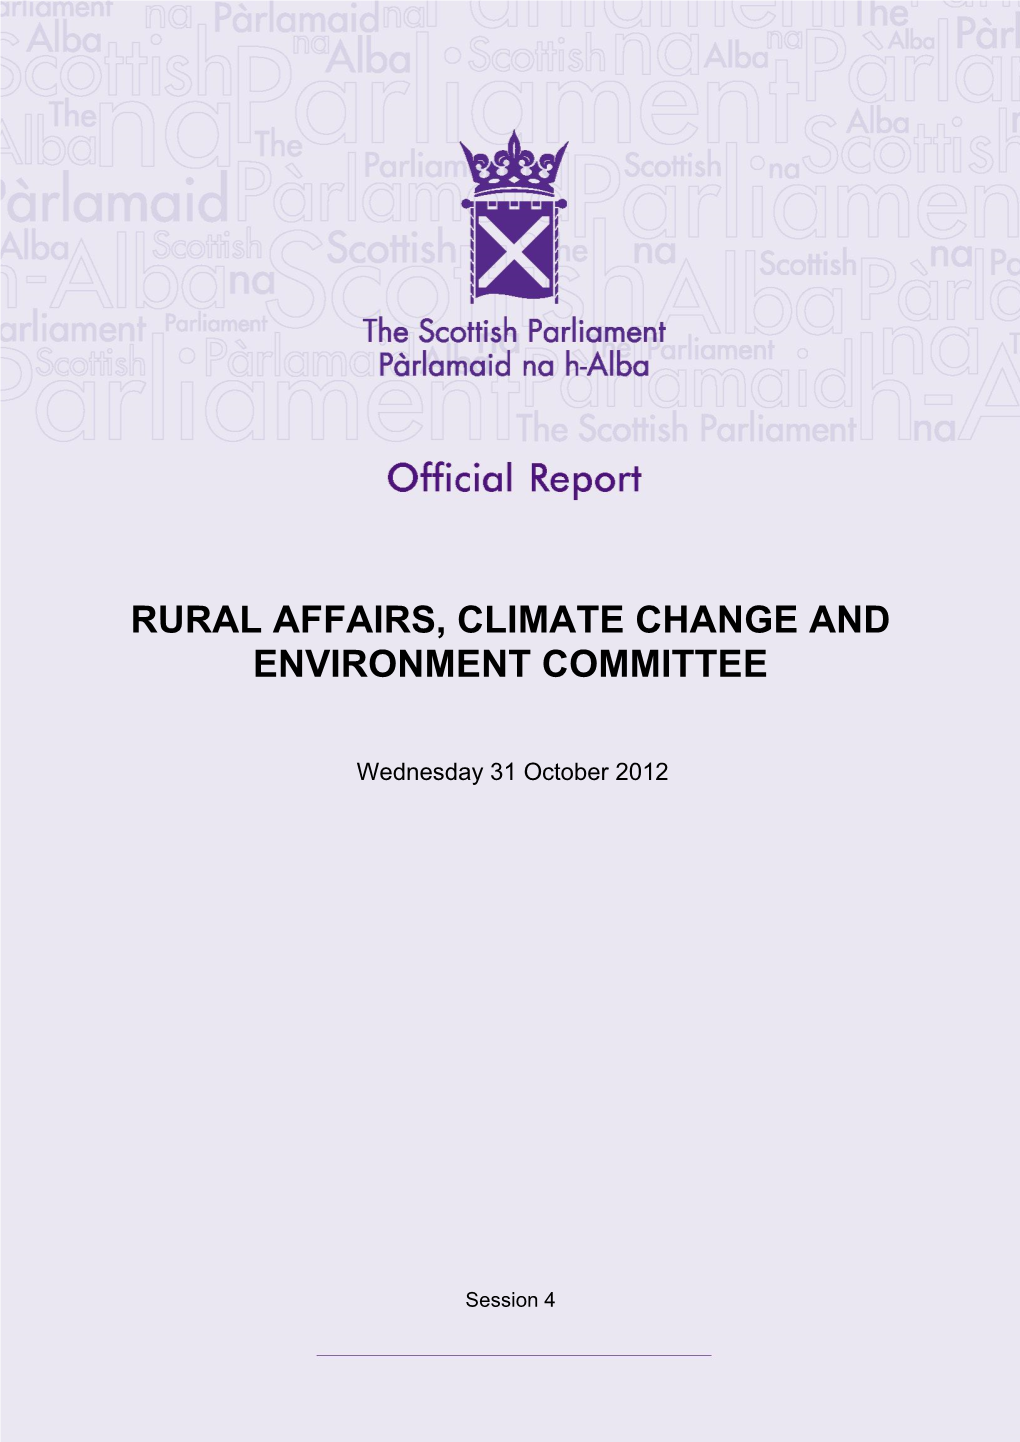 Rural Affairs, Climate Change and Environment Committee